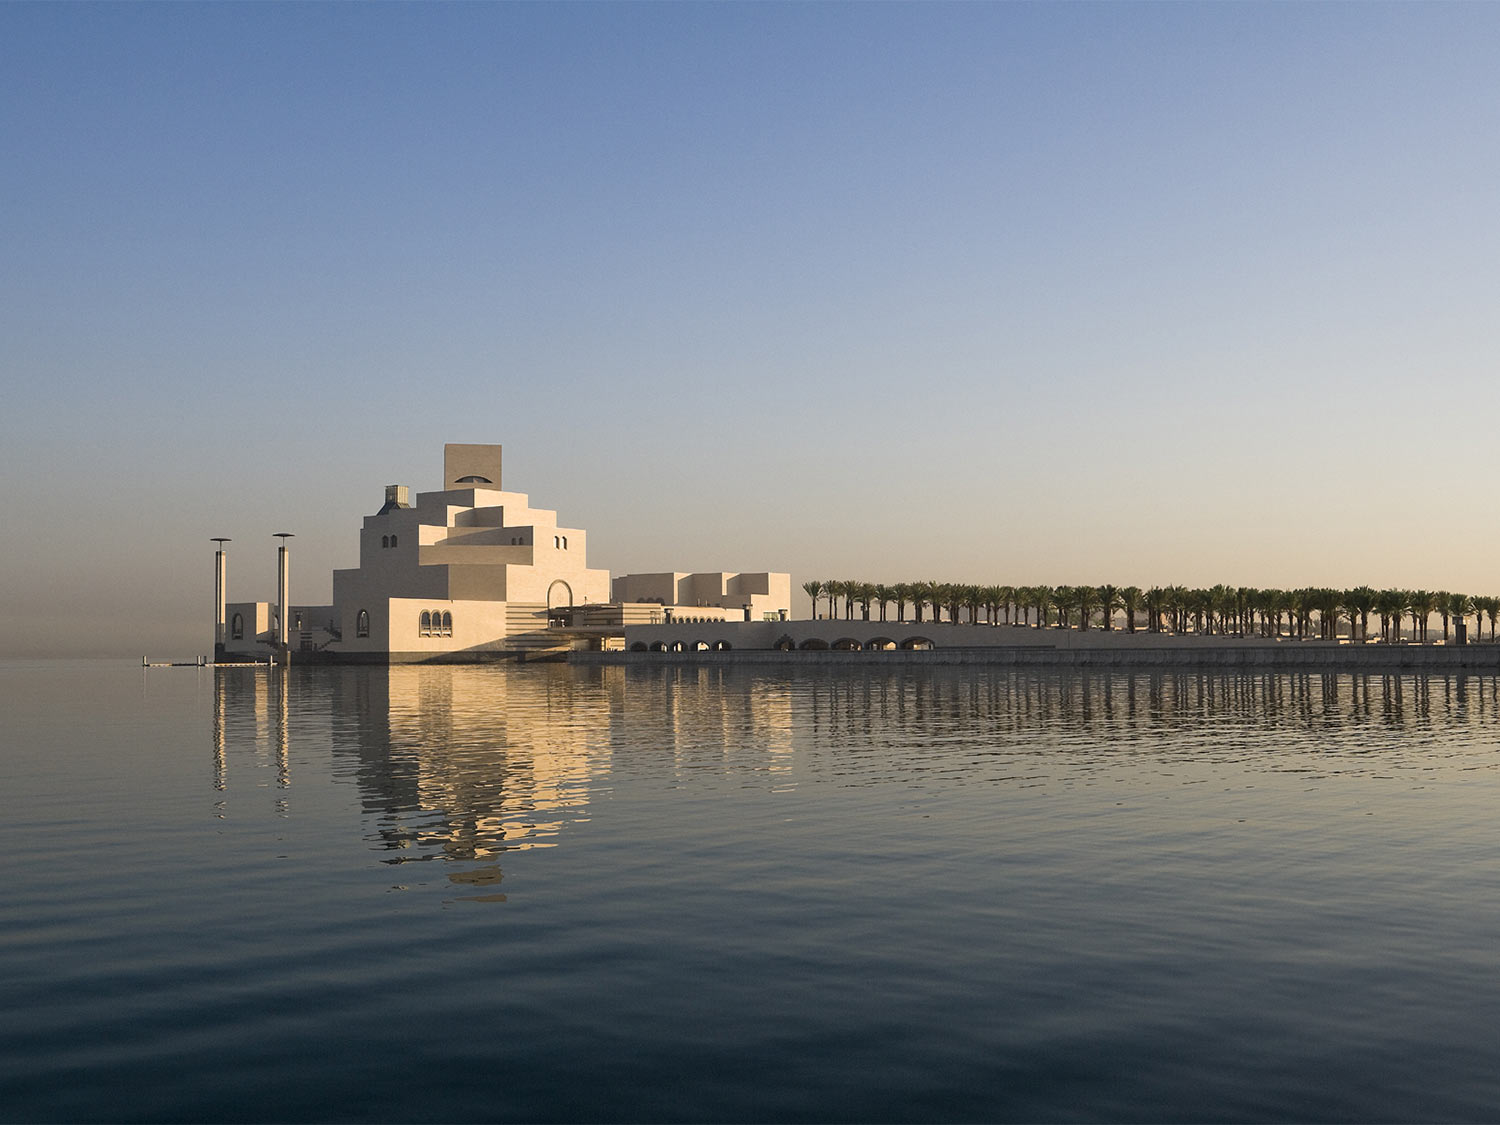 QATAR’S ICONIC MUSEUM OF ISLAMIC ART TO REOPEN OCTOBER 5, 2022 FOLLOWING ENHANCEMENT PROJECT AND COLLECTION REINSTALLATION